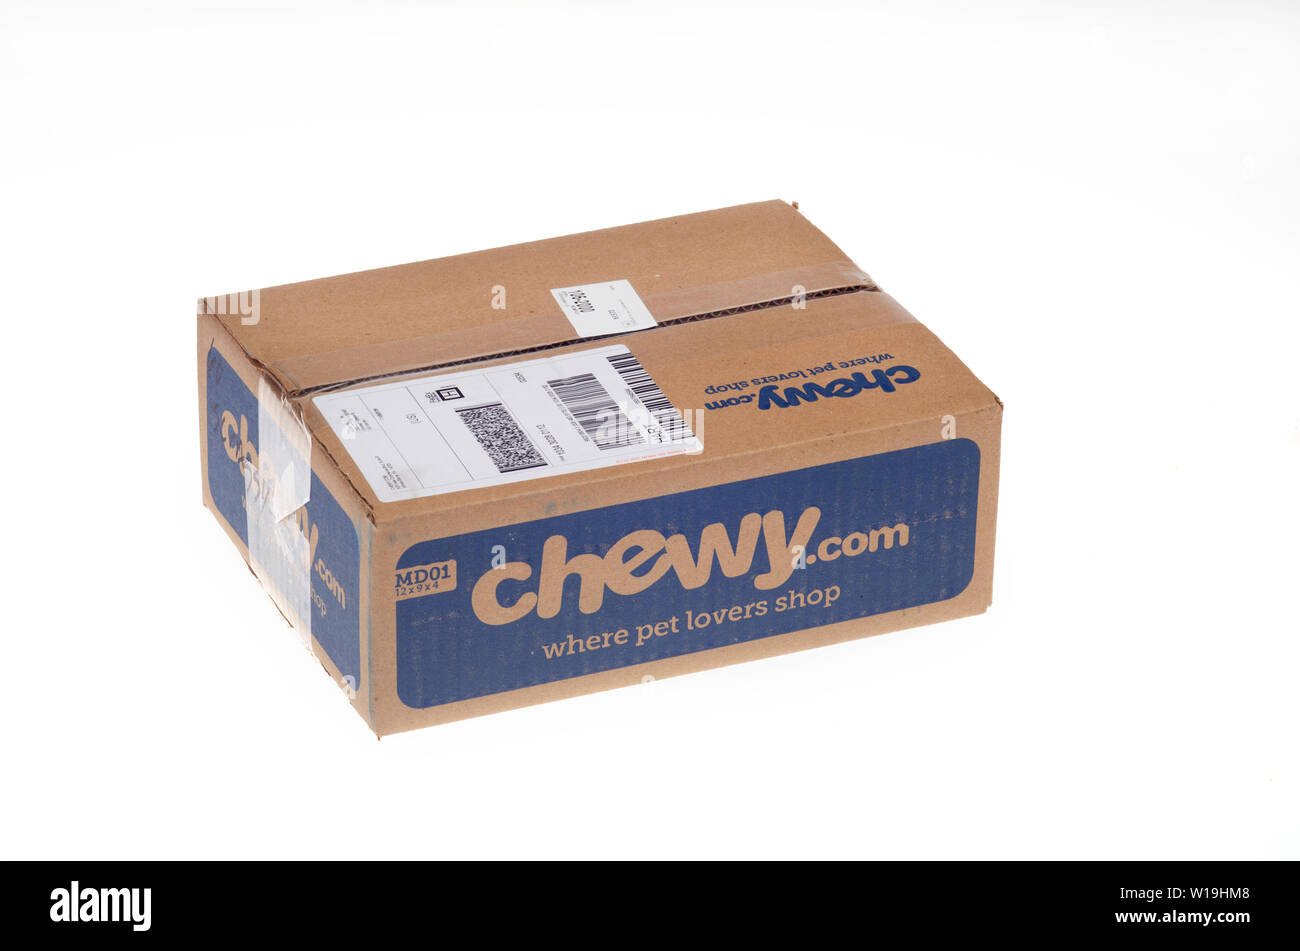 Chewy pet supplies box delivered via FedEx Home delivery on white background Stock Photo